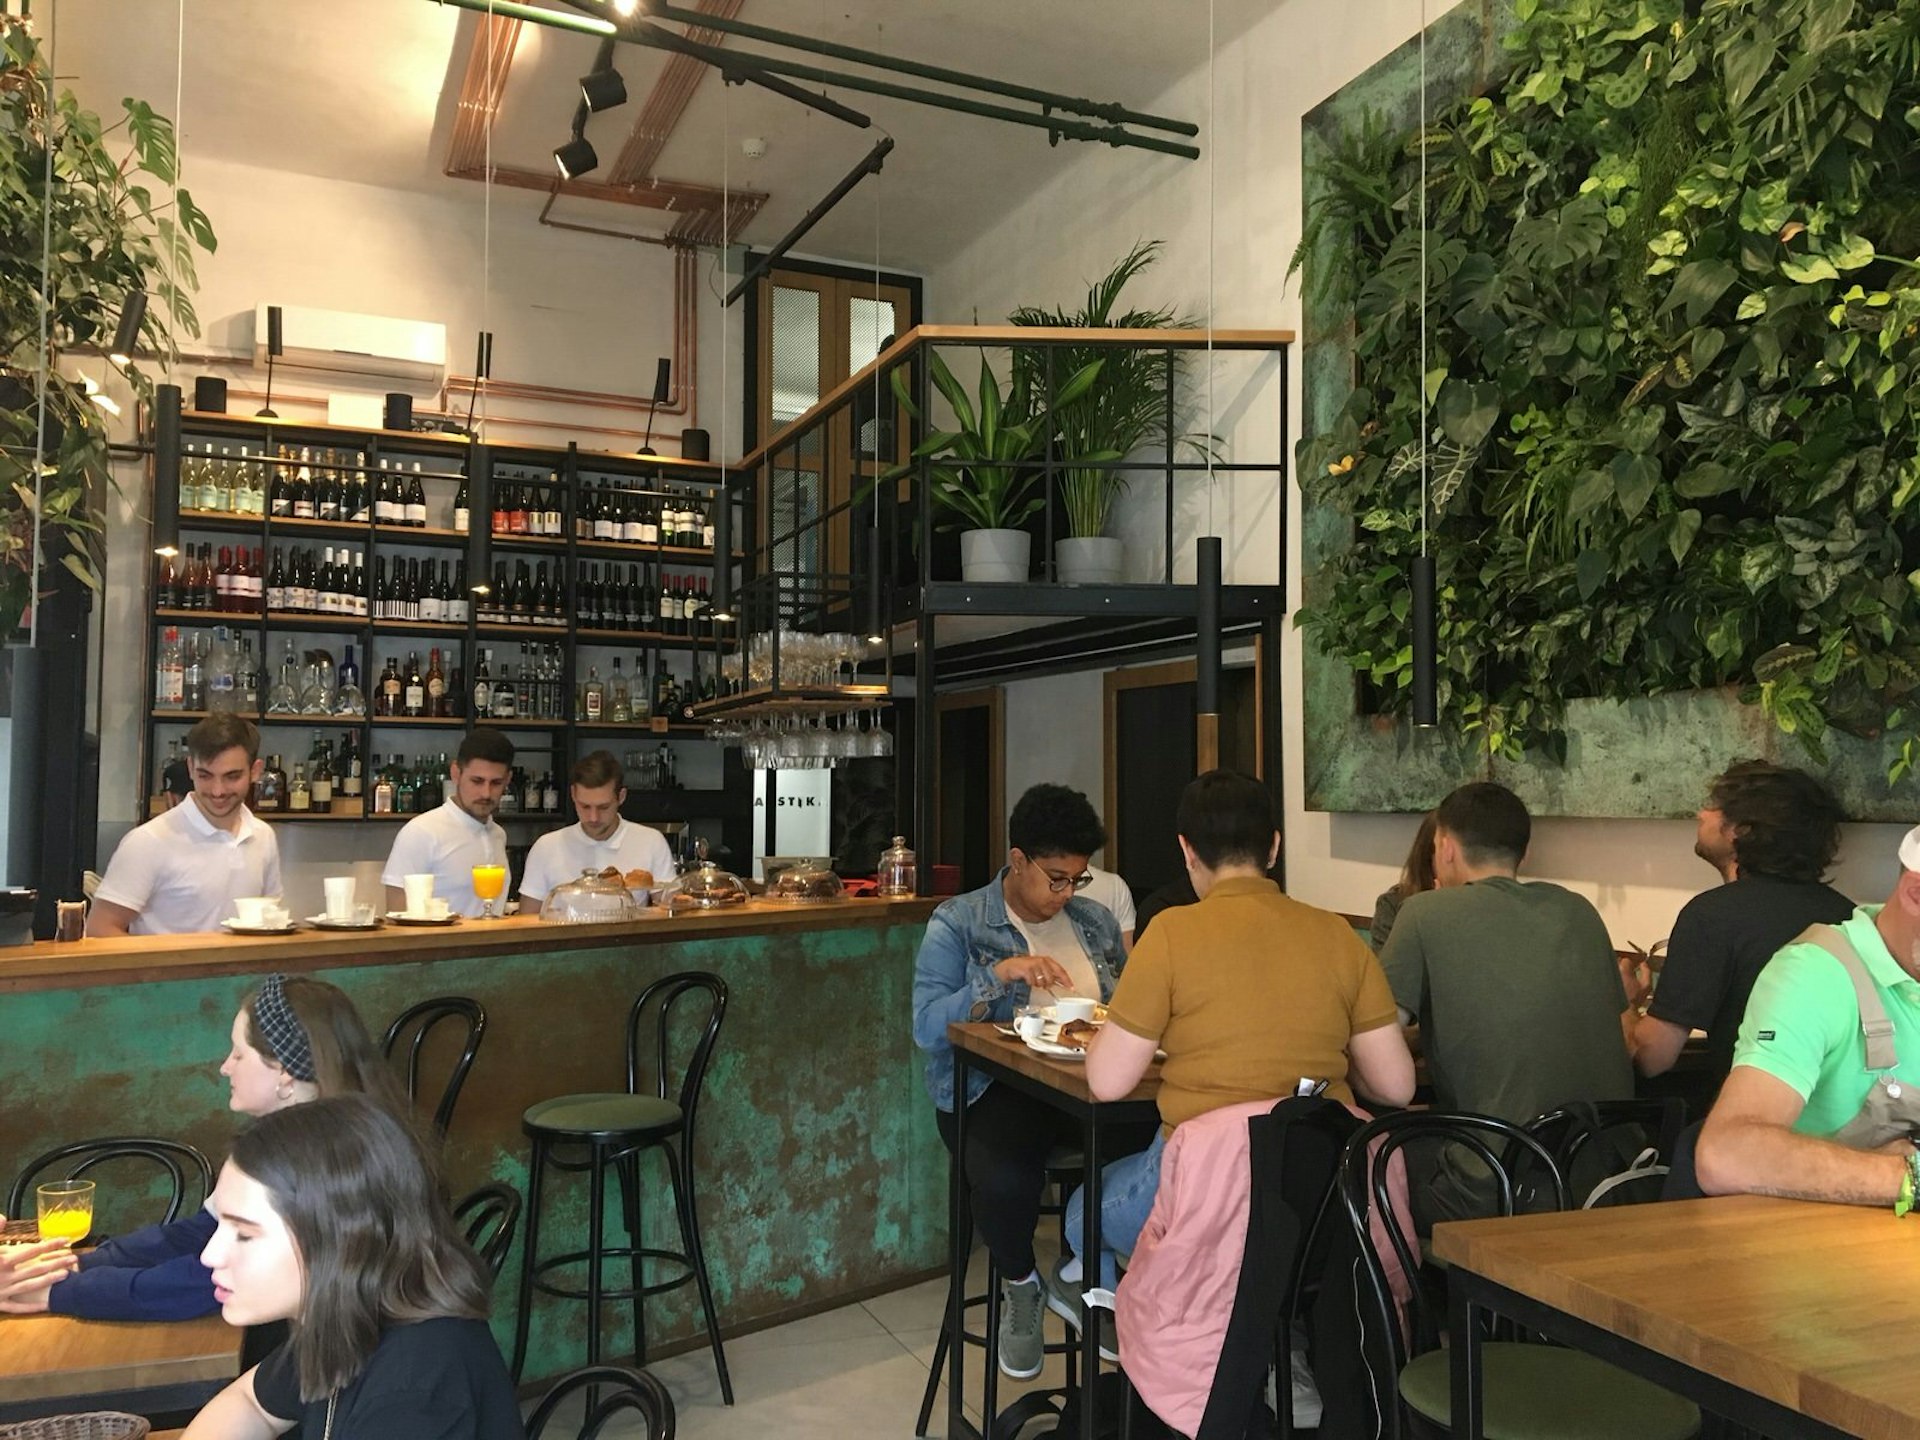 Three white-shirted baristas stand behind a tall counter that is lined with glasses of coffee and juice; behind them is a tall wall of shelves lined with bottles of wine; there is a wall of plants, as well as several shelves with large potted plants; in the foreground are diners enjoying their Budapest brunch while seated at tables